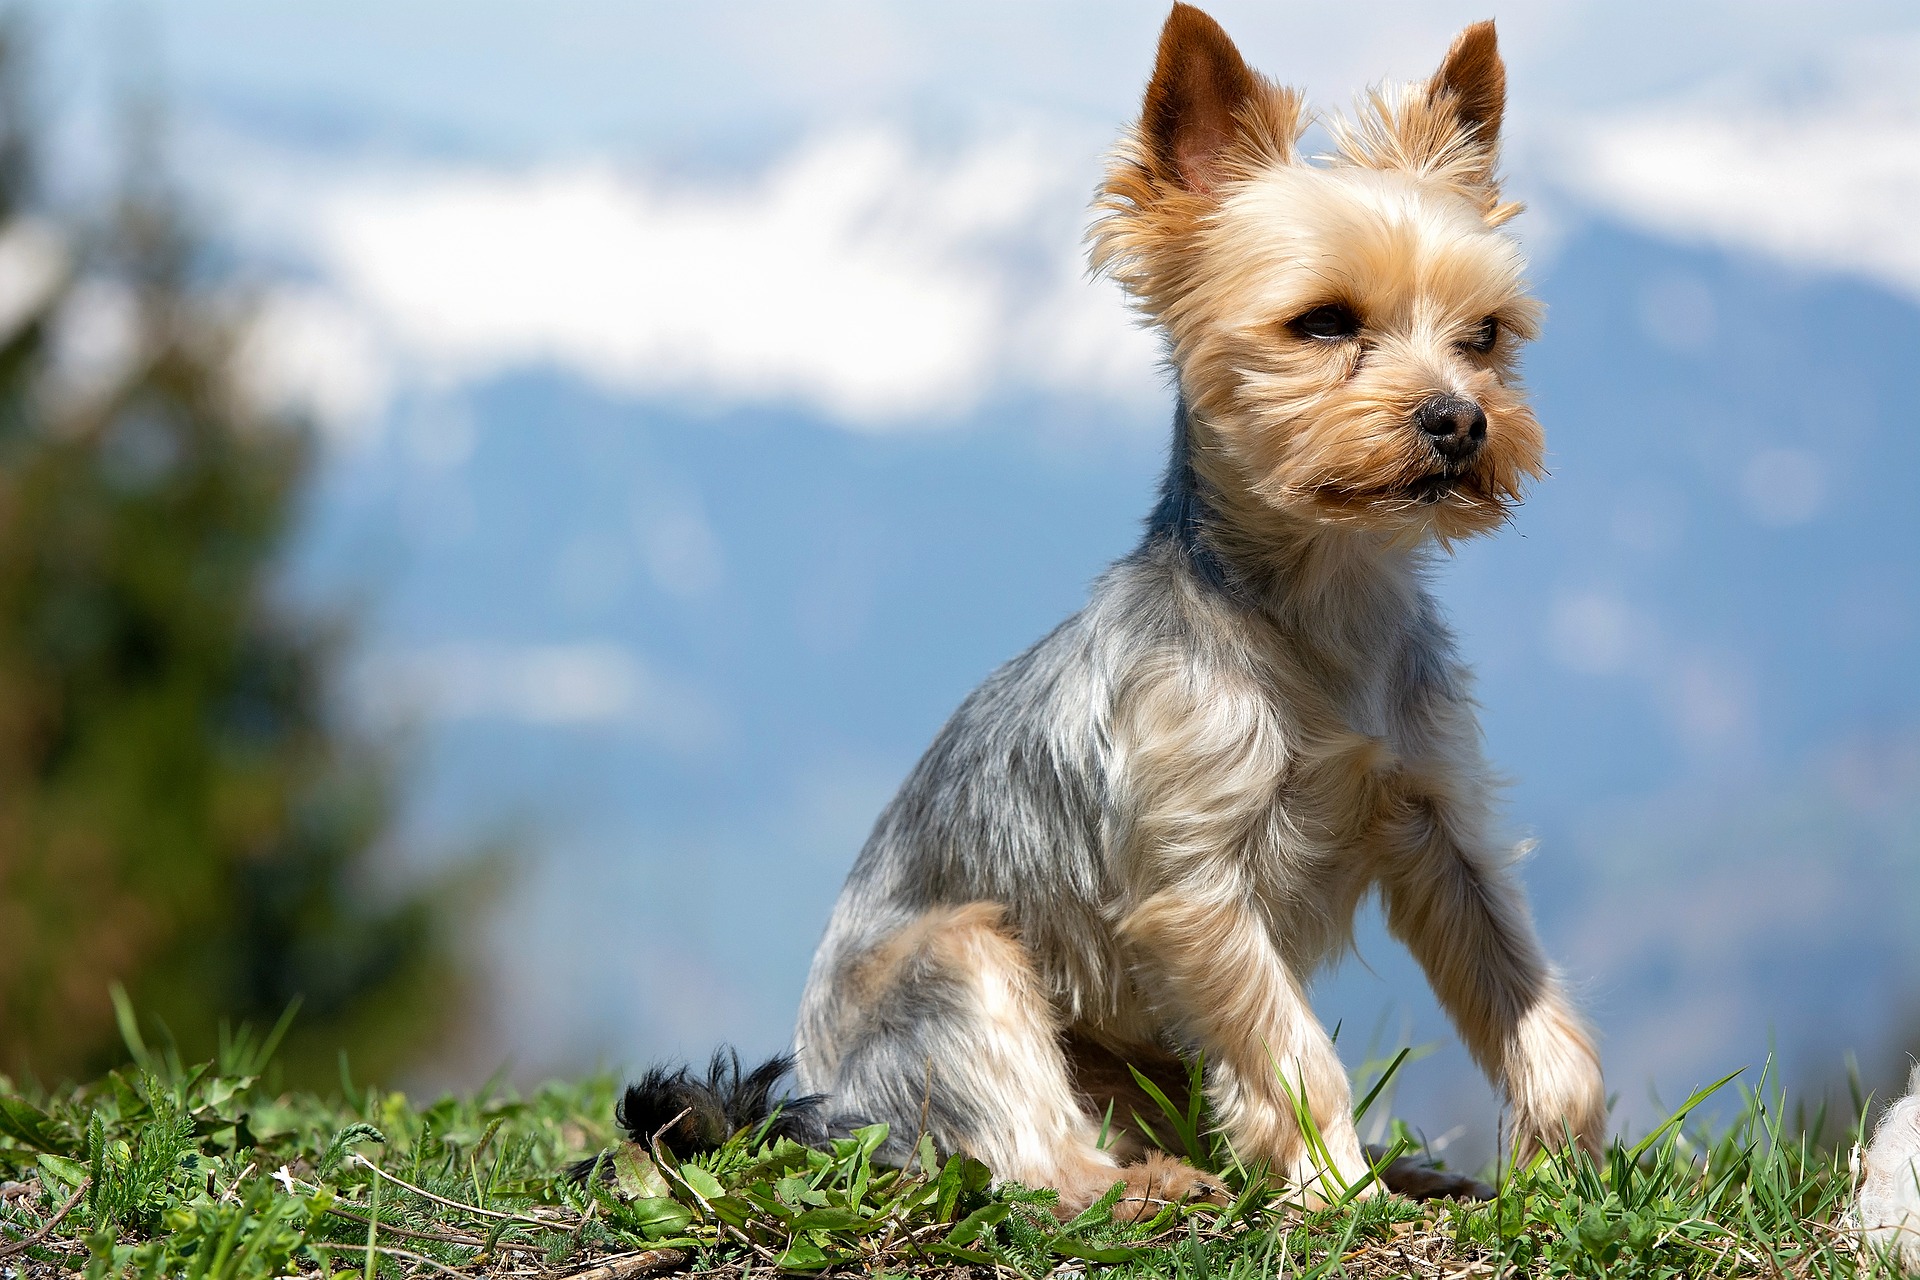 How to train a yorkie to come when called